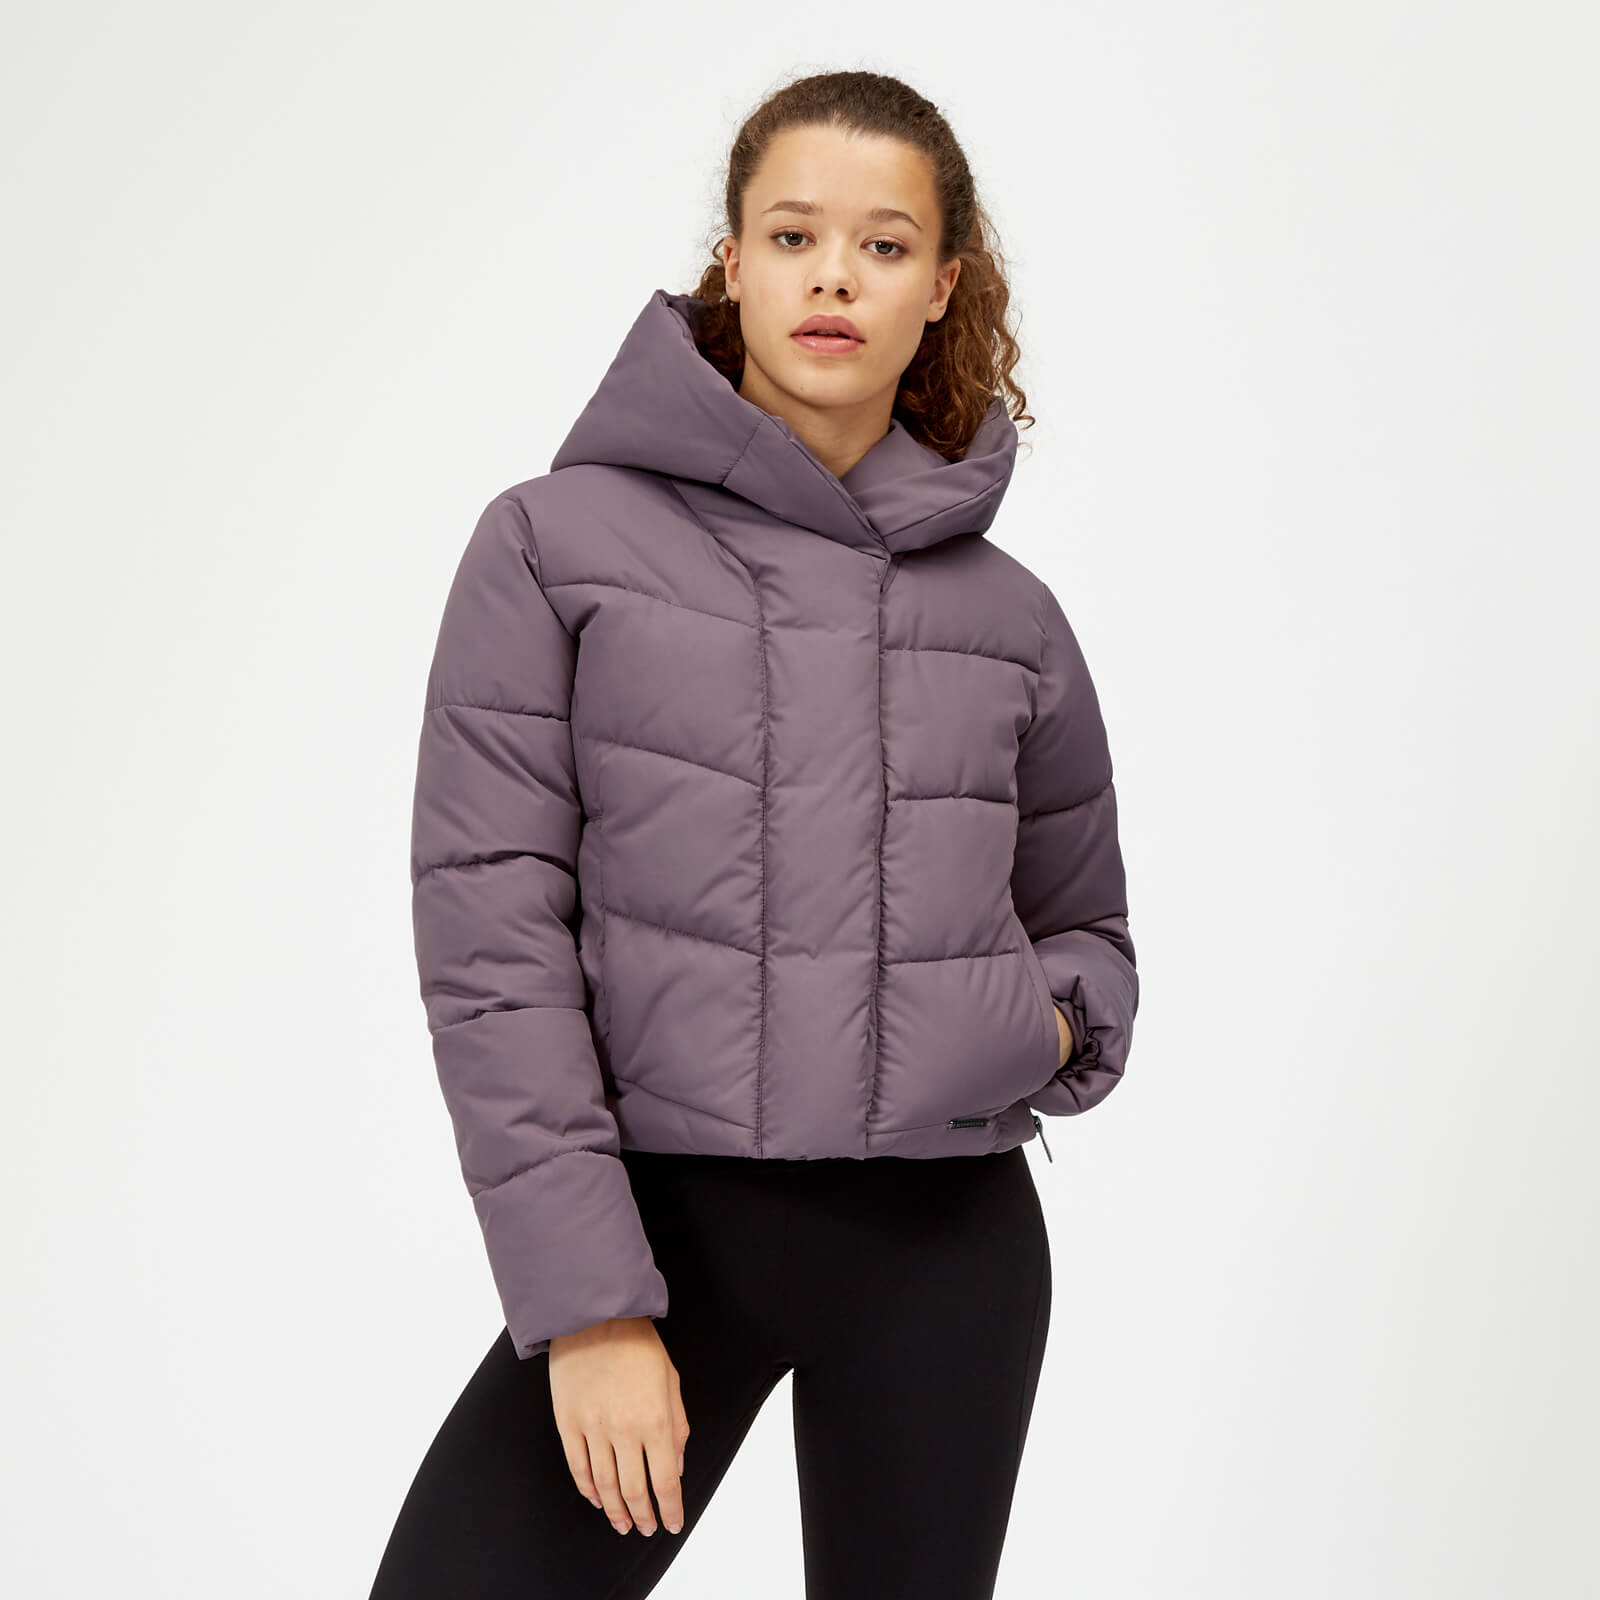 Myprotein Pro Tech Protect Puffer Jacket - Mauve